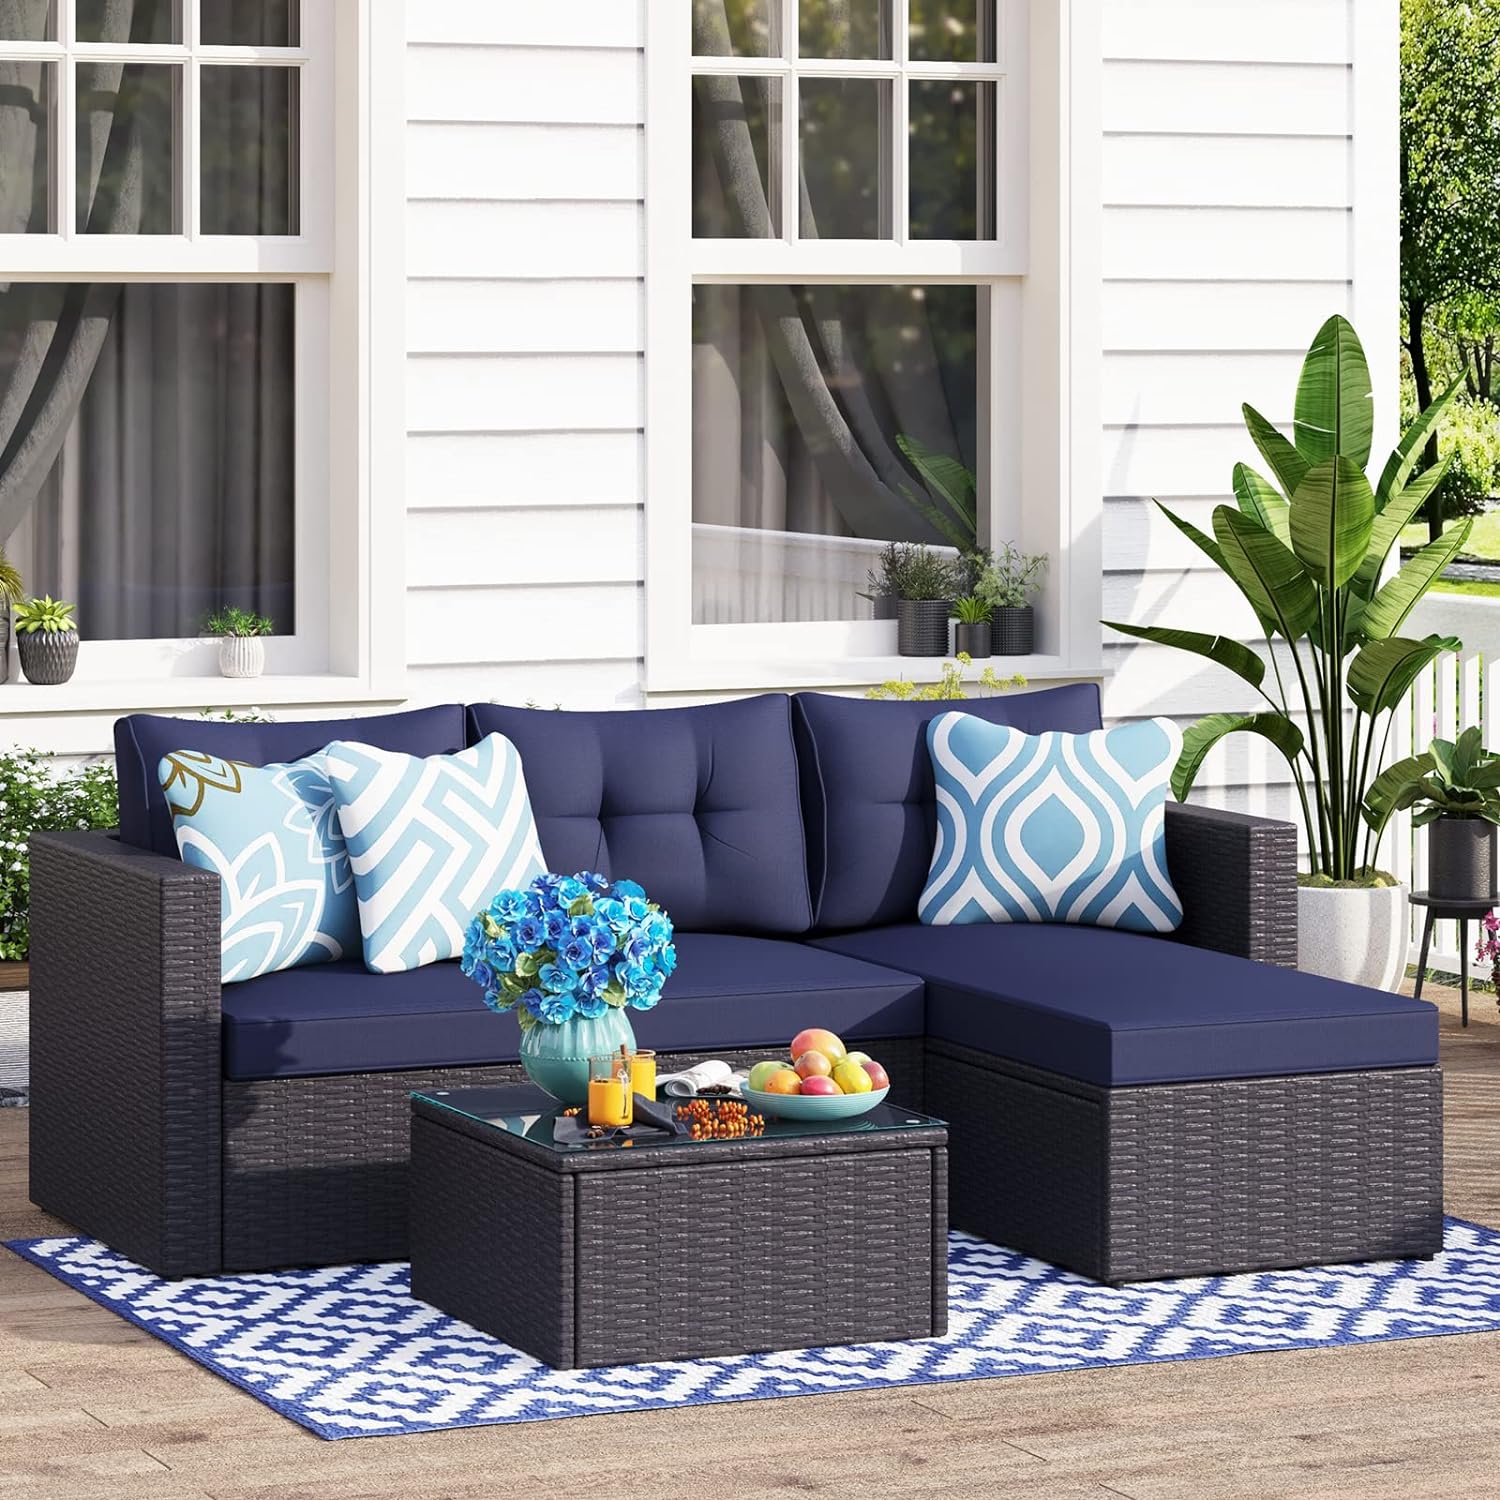 PHI VILLA Patio Sofa Set,3 Pieces All-Weather Upgrade Wicker Outdoor Sectional Sofa,L-Shaped Small Patio Conversation Furniture Set with Cushion and Coffee Table(Navy Blue)